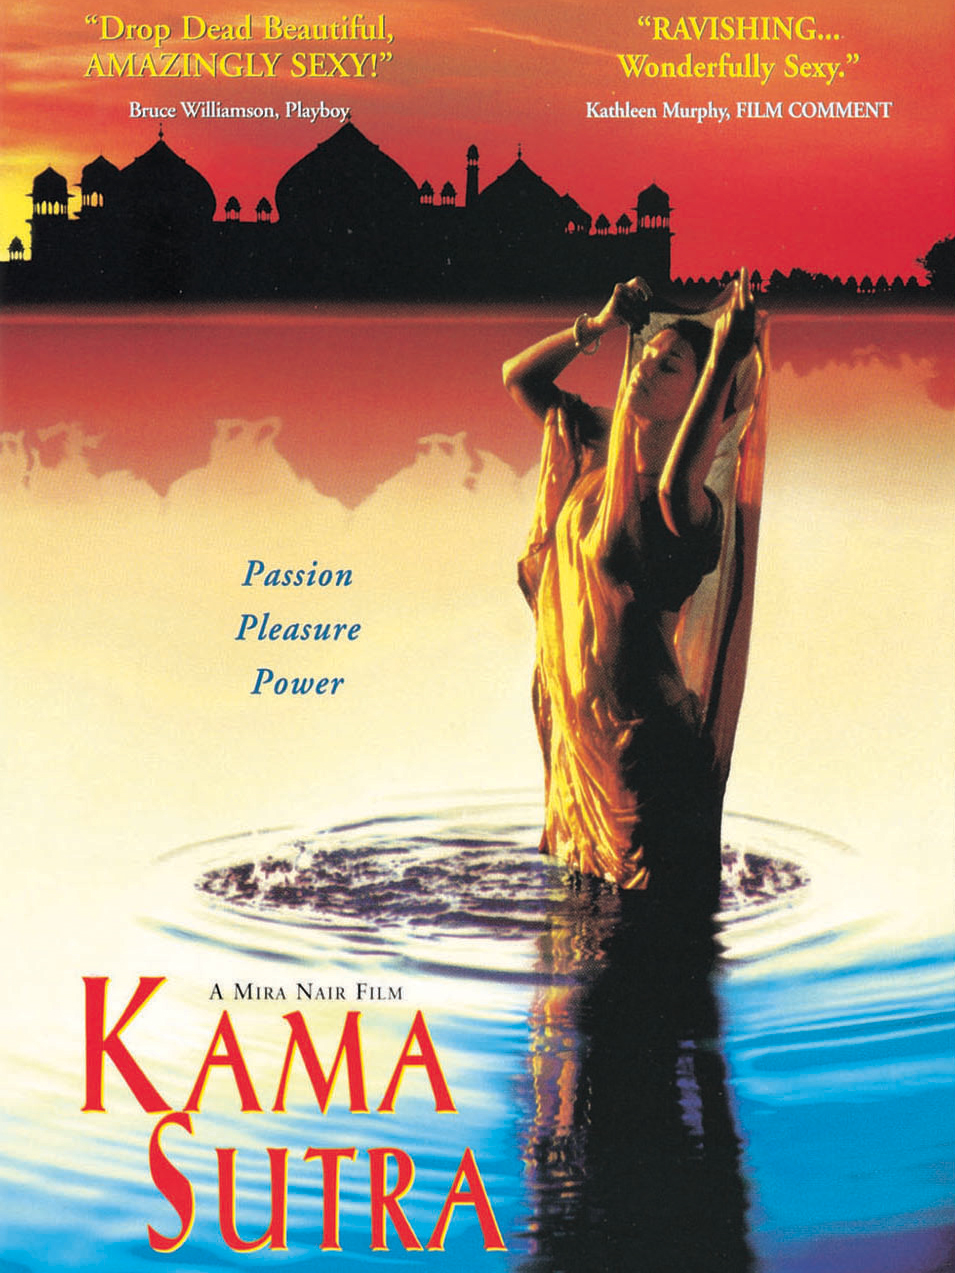 Stream Kama Sutra: A Tale of Love, watch trailers, see the cast, and more a...